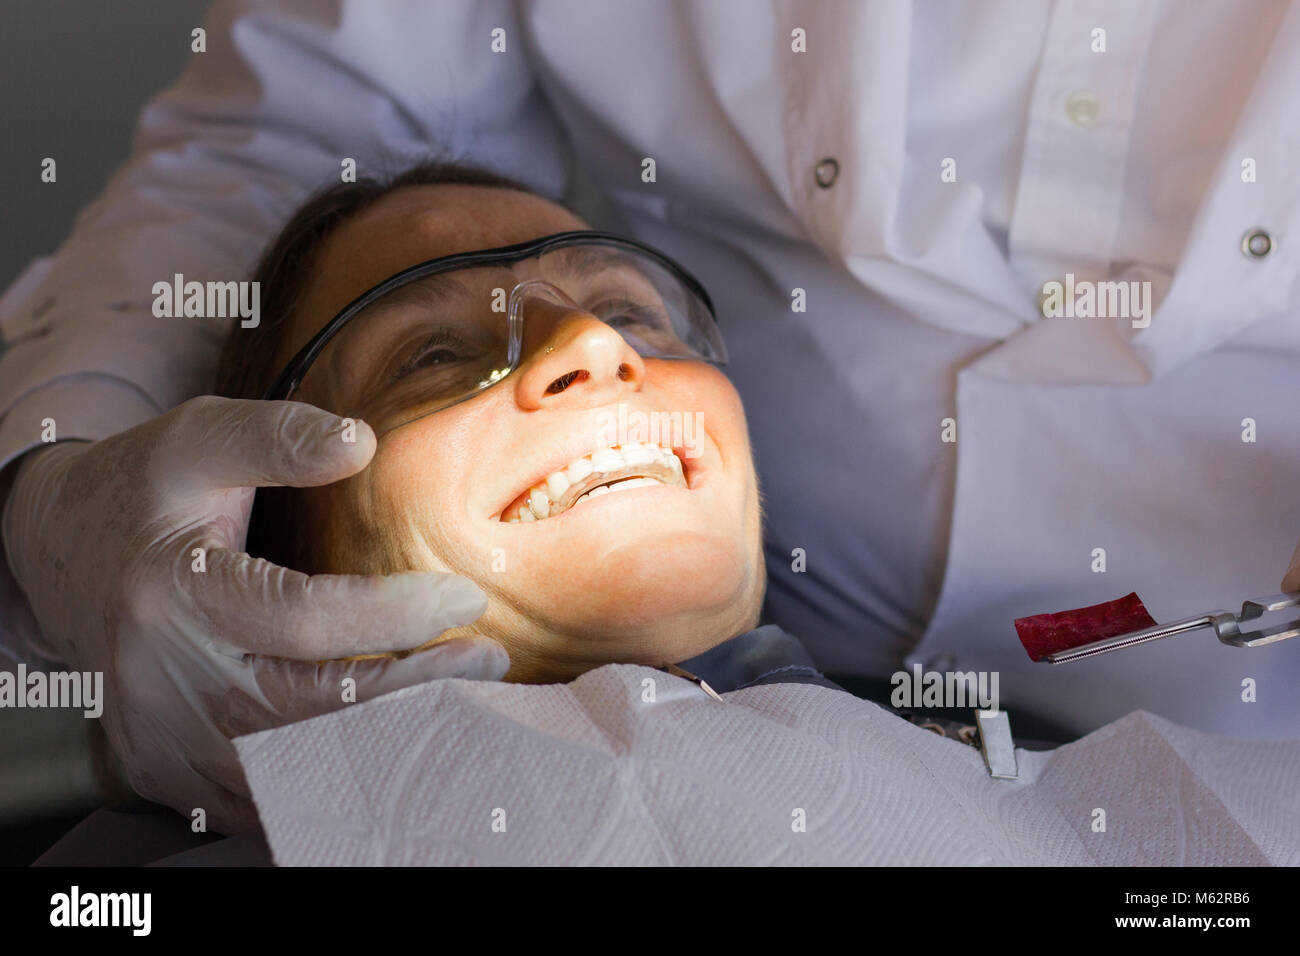 Happy woman with safety glasses smiling with mouth guard on at dental clinic while dentist holds her face with latex gloves Stock Photo